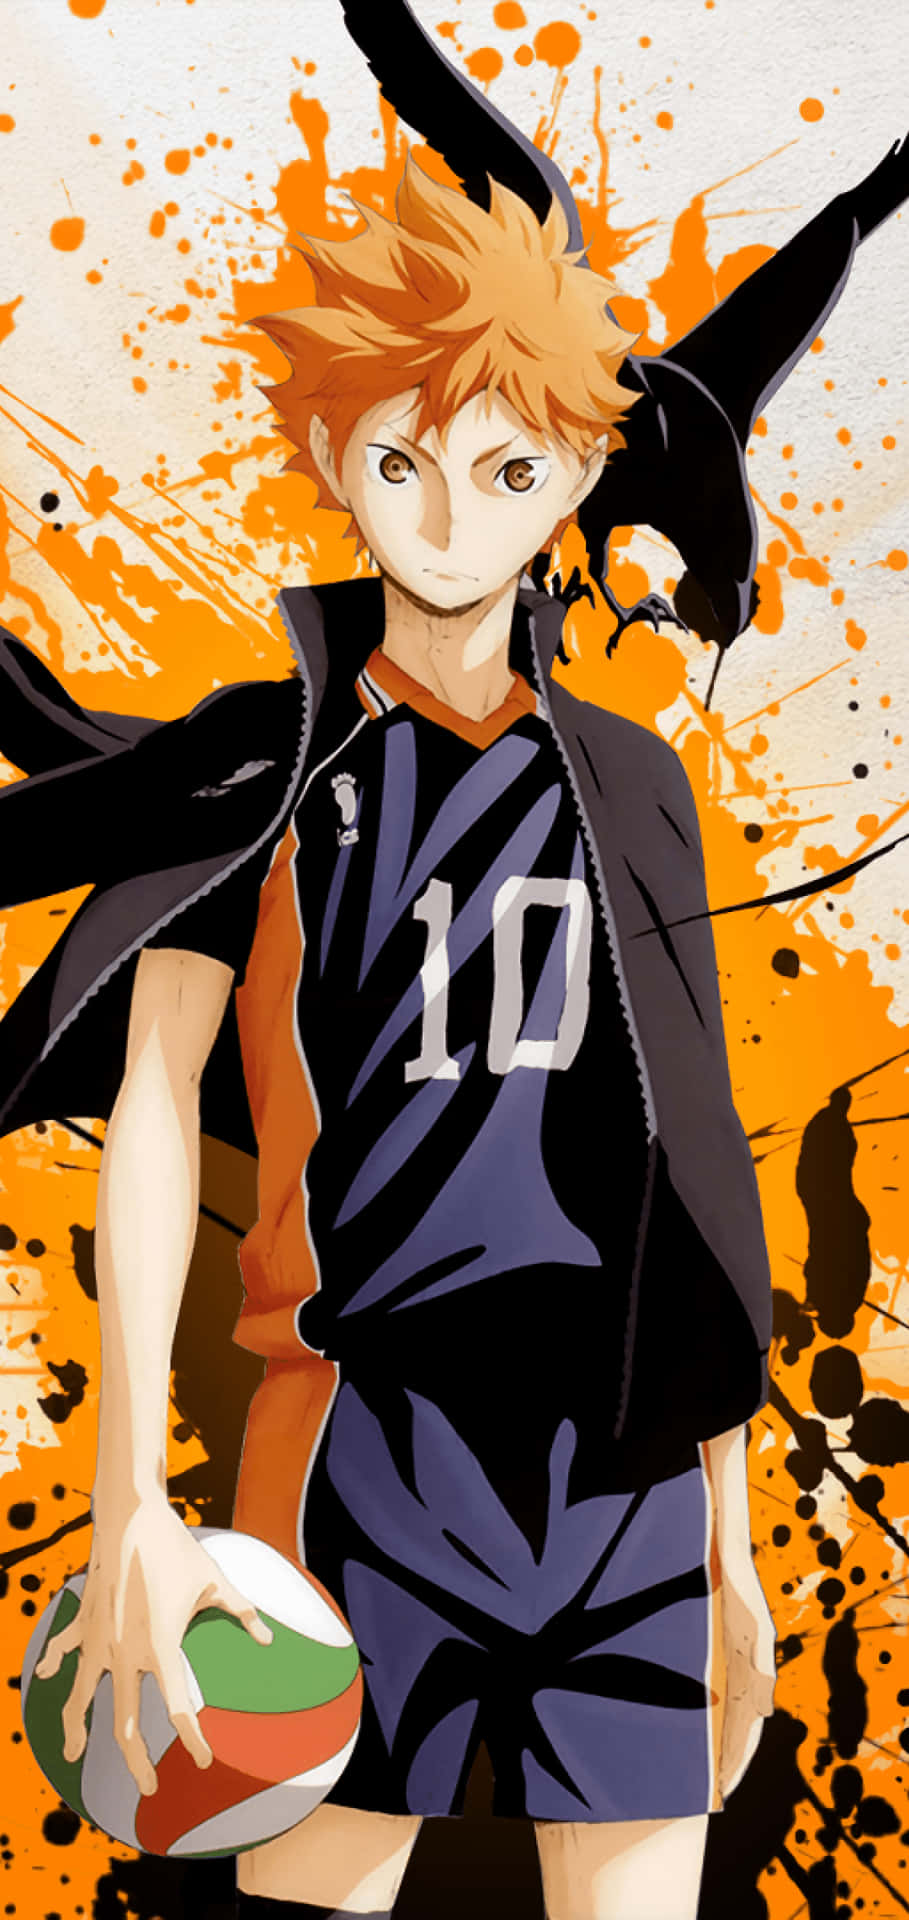 Enjoy your favorite Japanese Anime, Haikyuu, with a cool iPhone Wallpaper Wallpaper